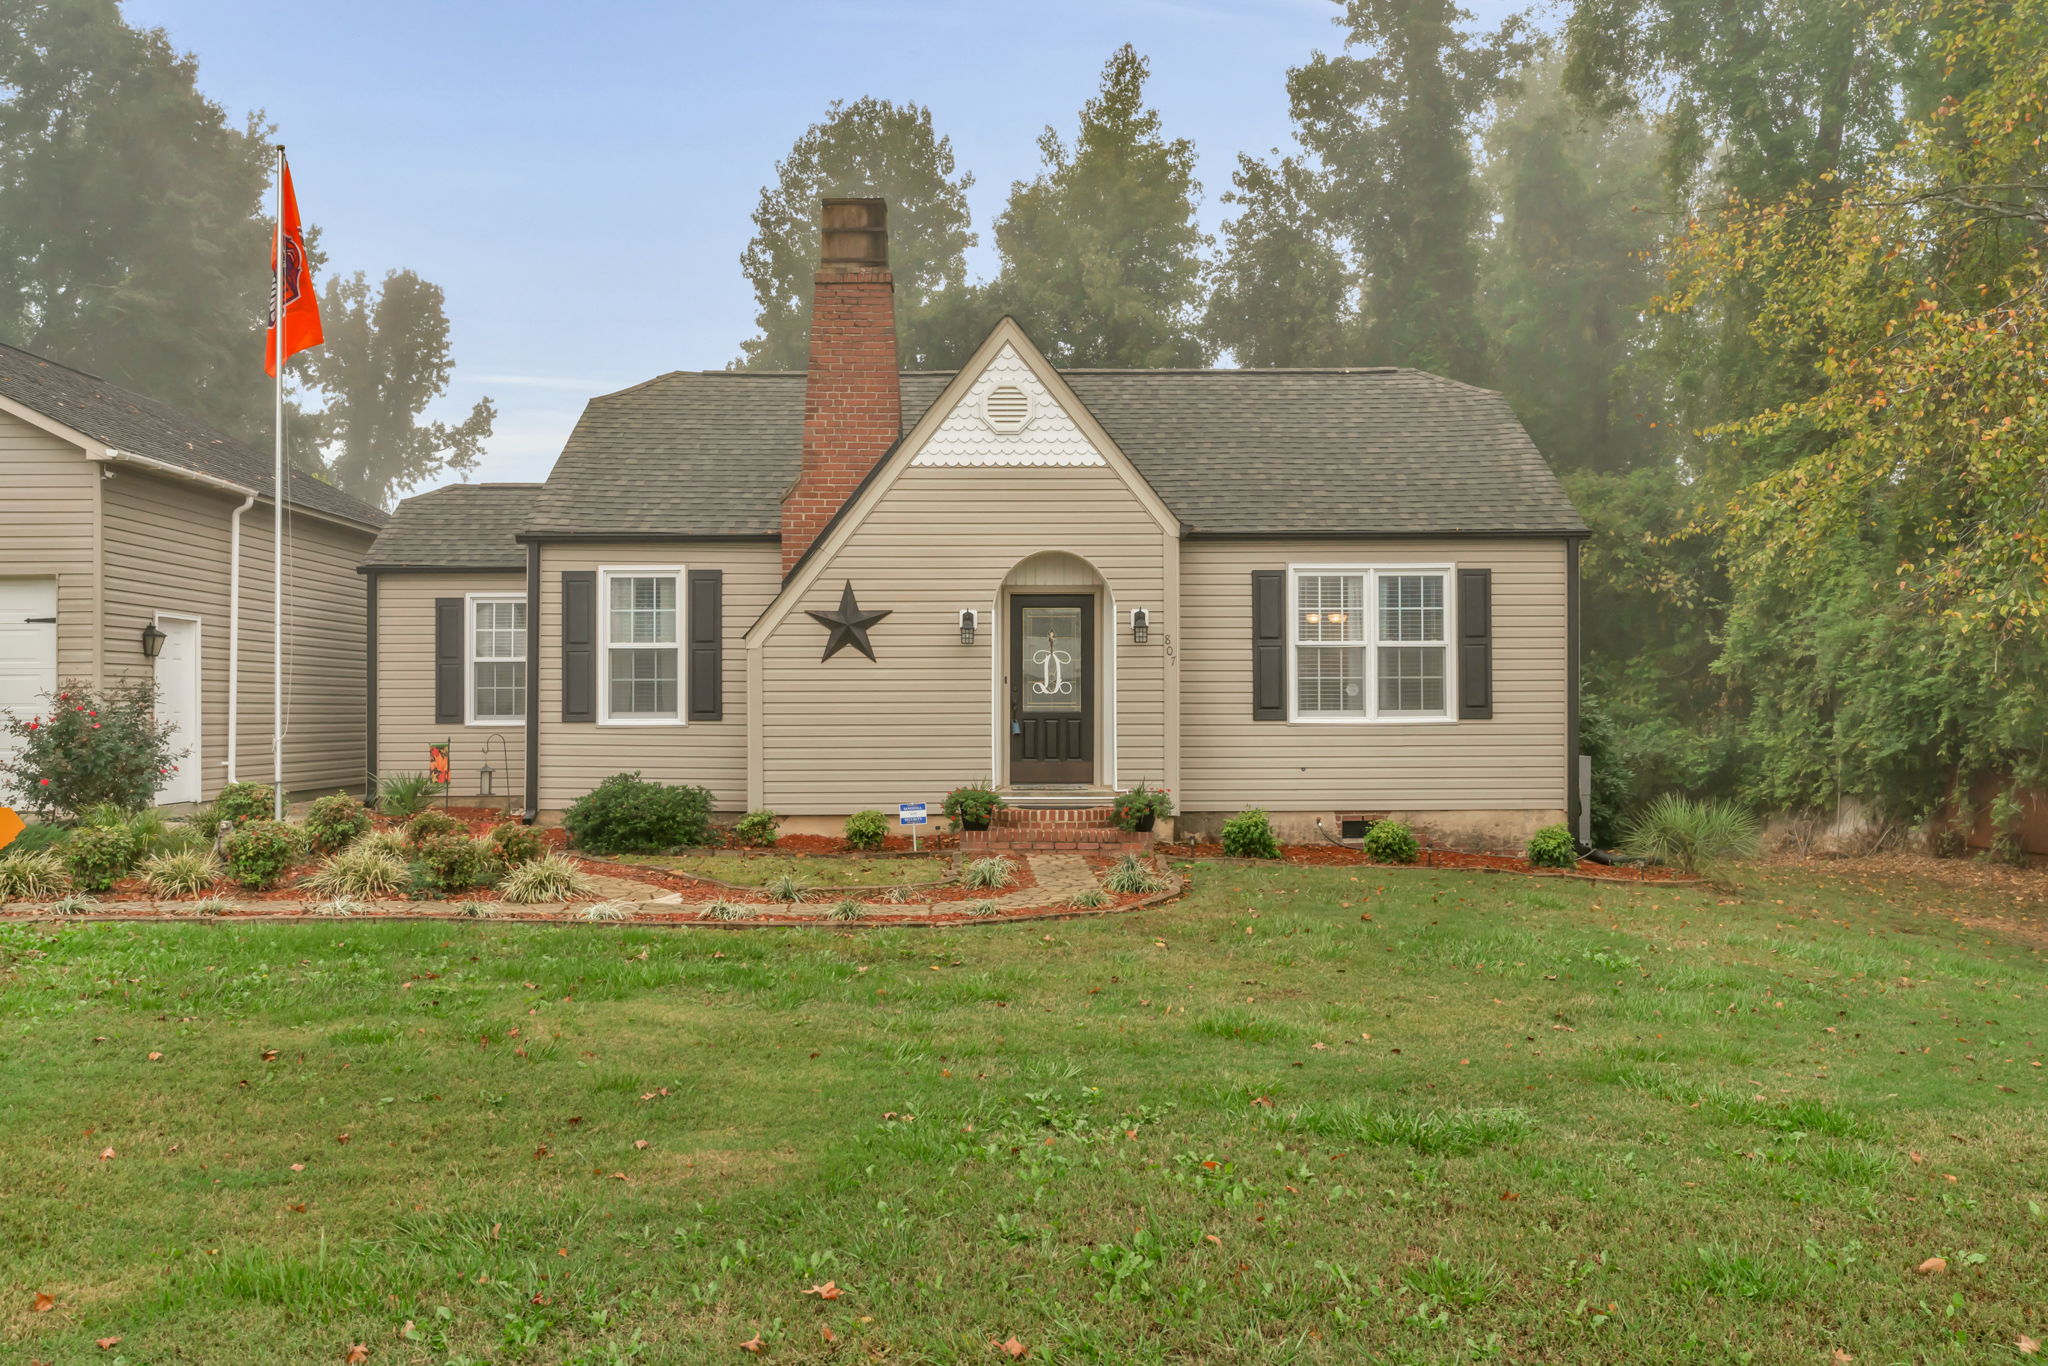  807 N Pearl St, Pageland, SC 29728, US Photo 2